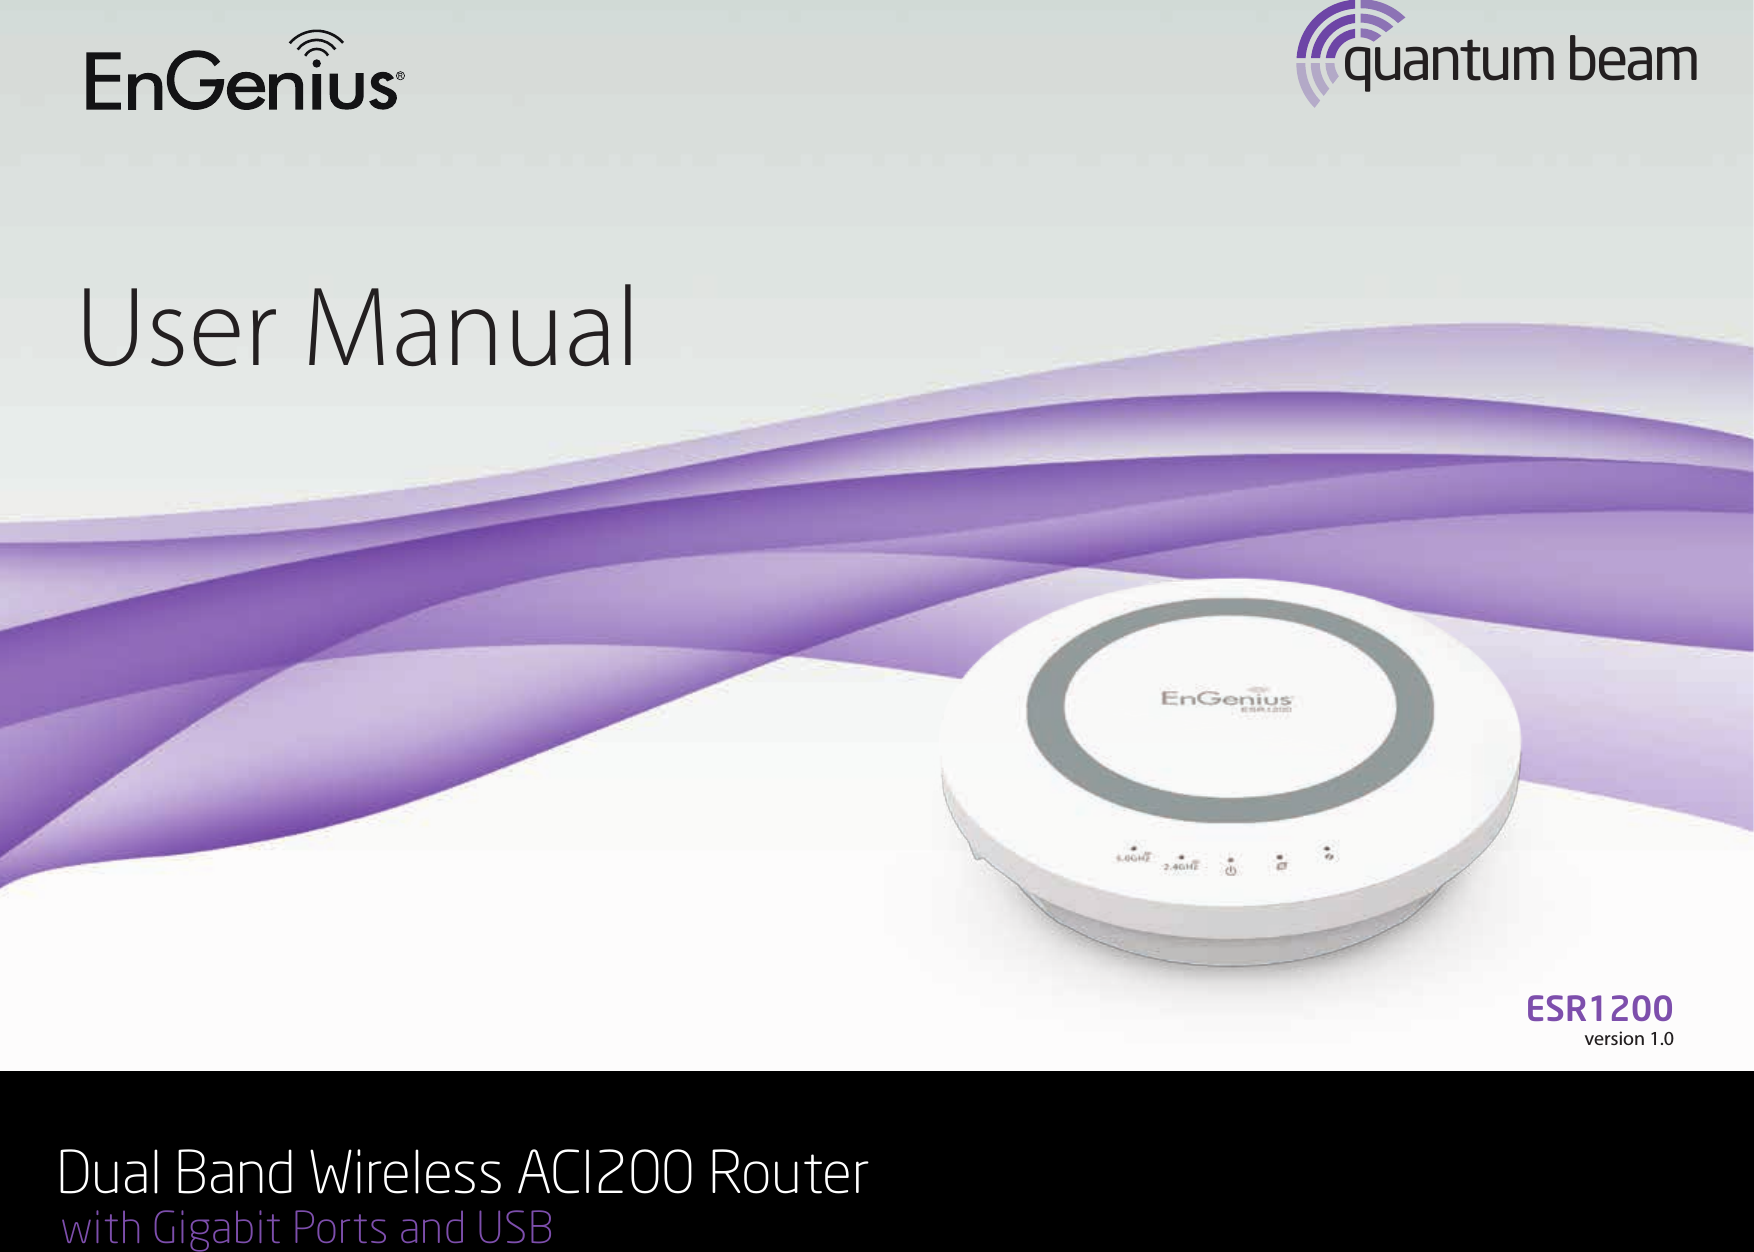 1quantum beamUser ManualDual Band Wireless ACI200 Router with Gigabit Ports and USBESR1200version 1.0